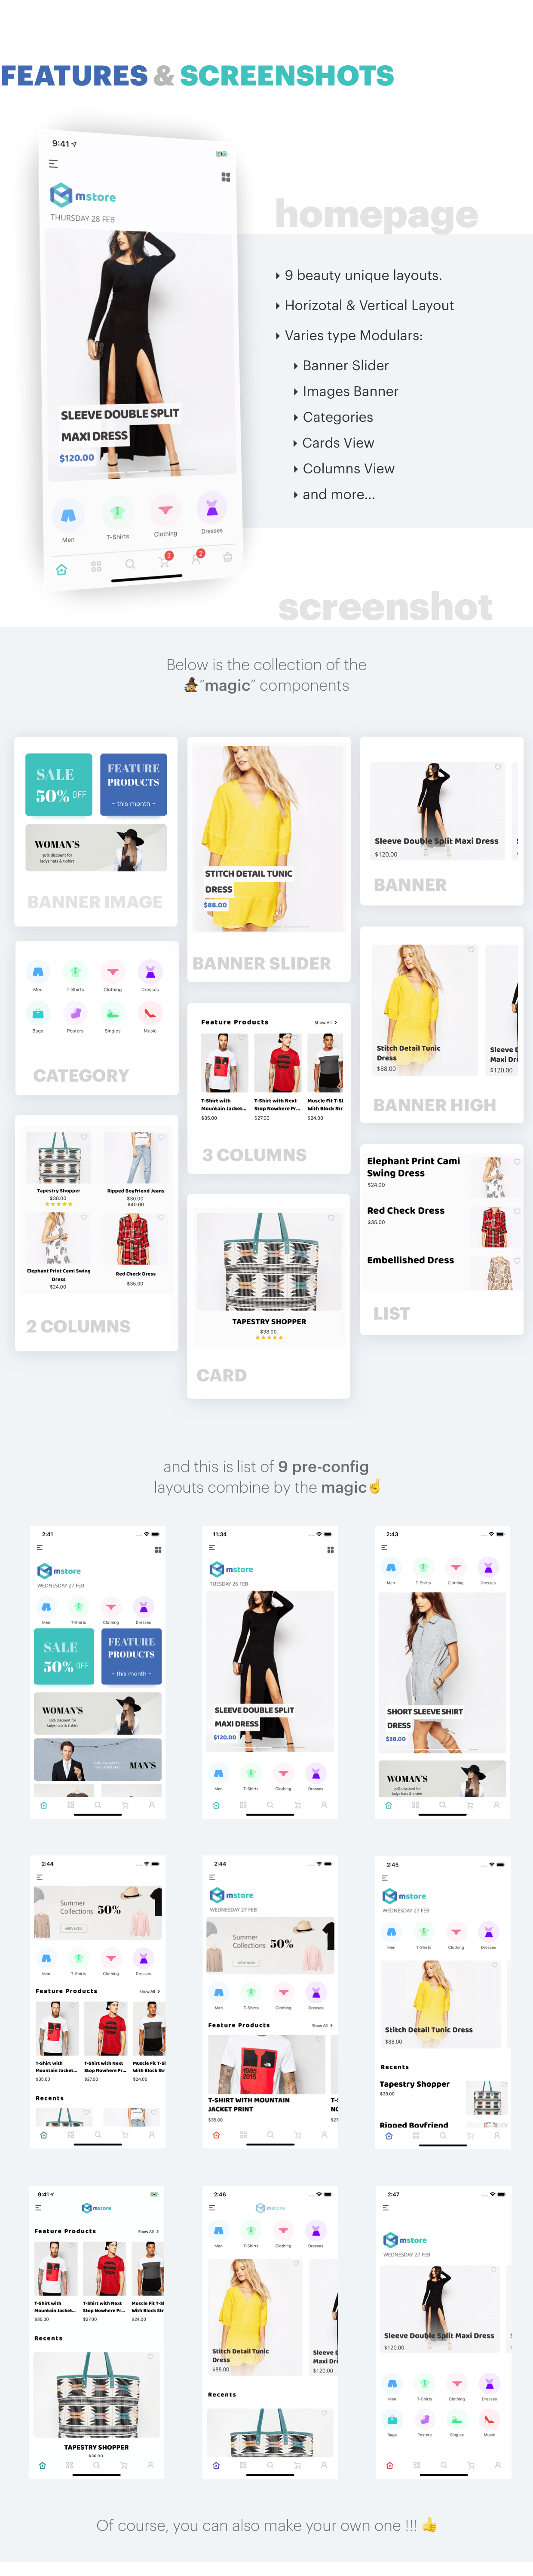 MStore Pro - Complete React Native template for e-commerce - 20